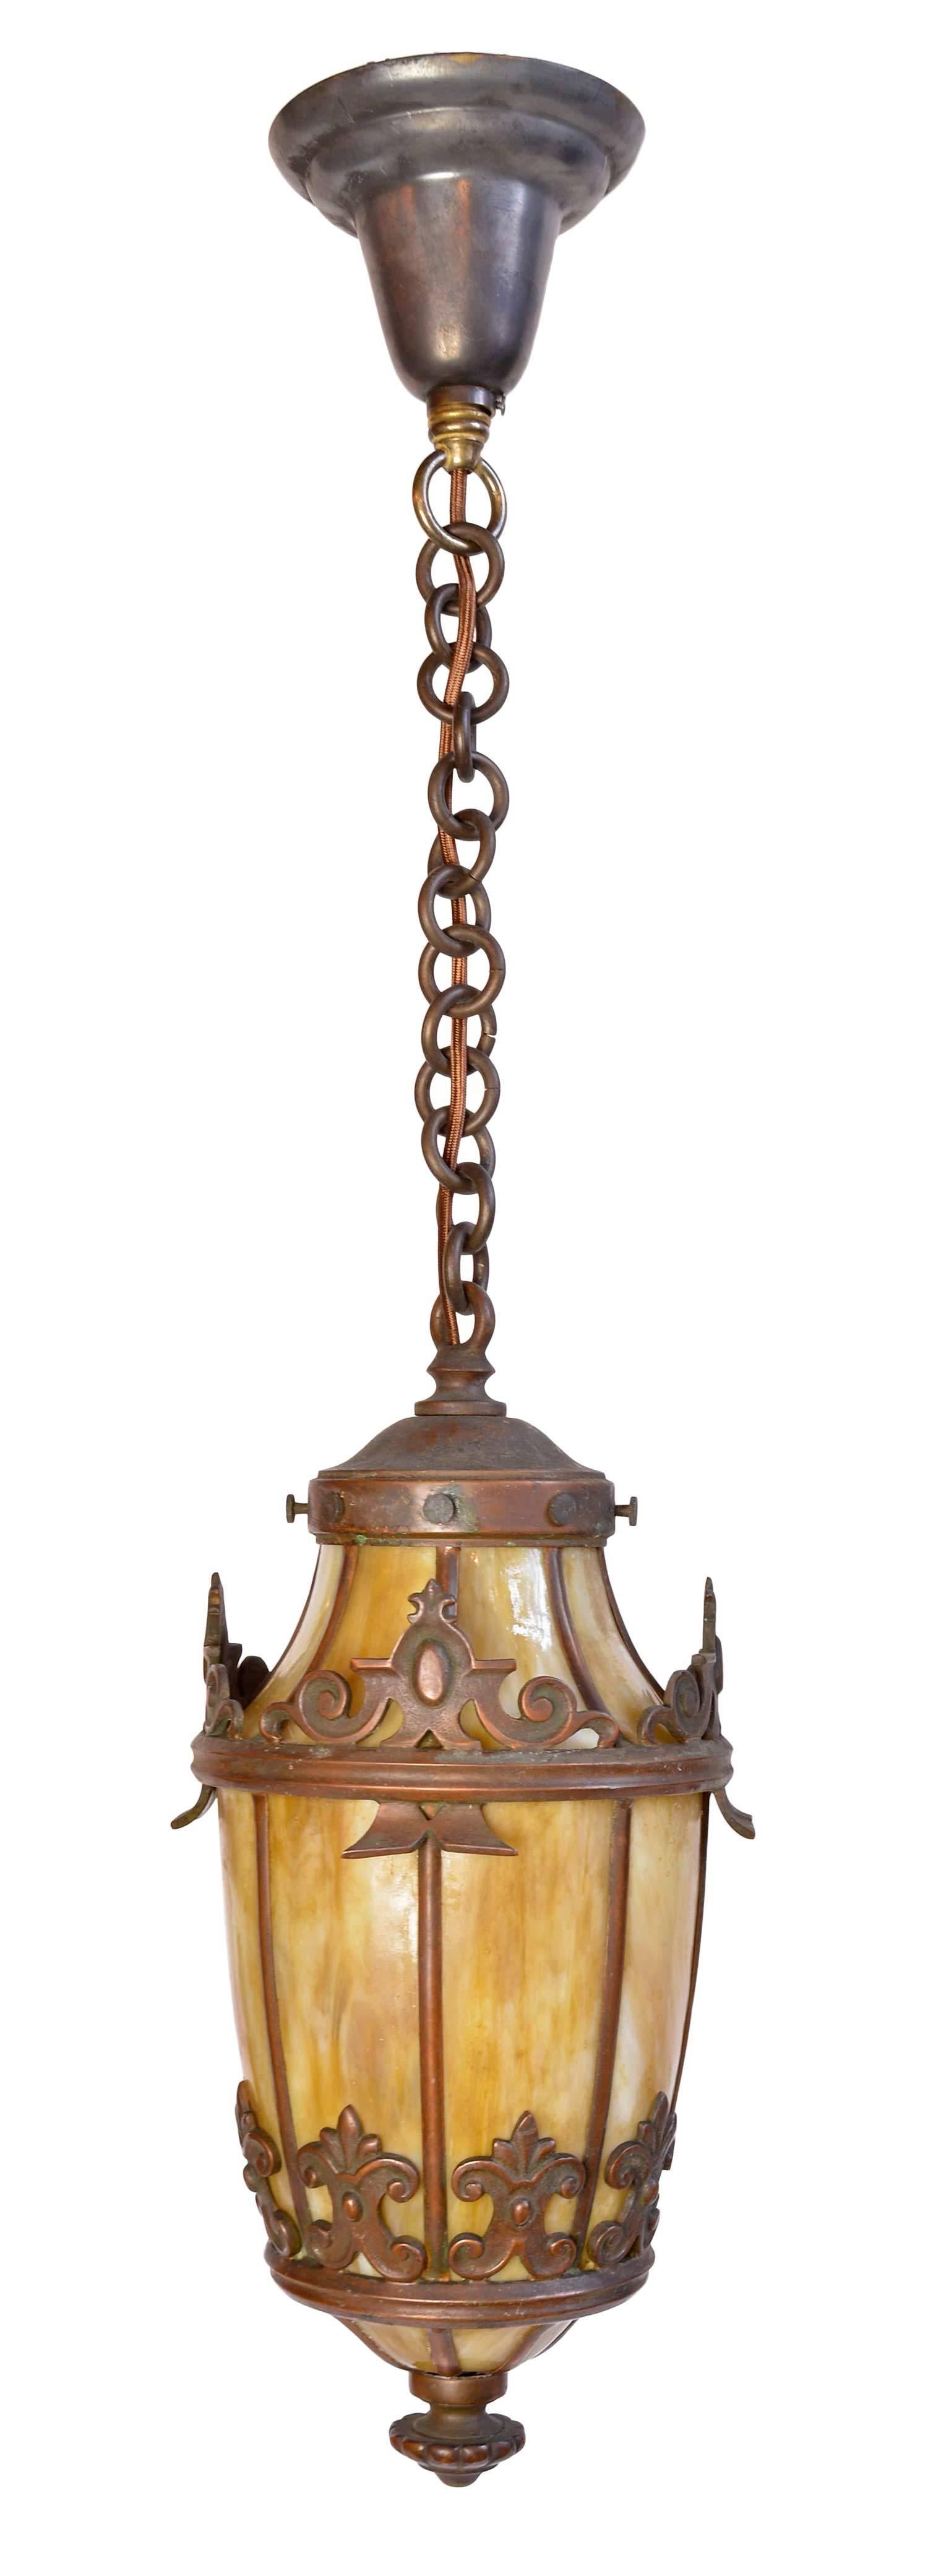 These pendants are made of cast bronze with heavy finials and decorative fleur-de-lis details. Each feature a rich series of bent panels in warm yellow. The fixture alone is 15" and height of the overall light is adjustable. Quantity